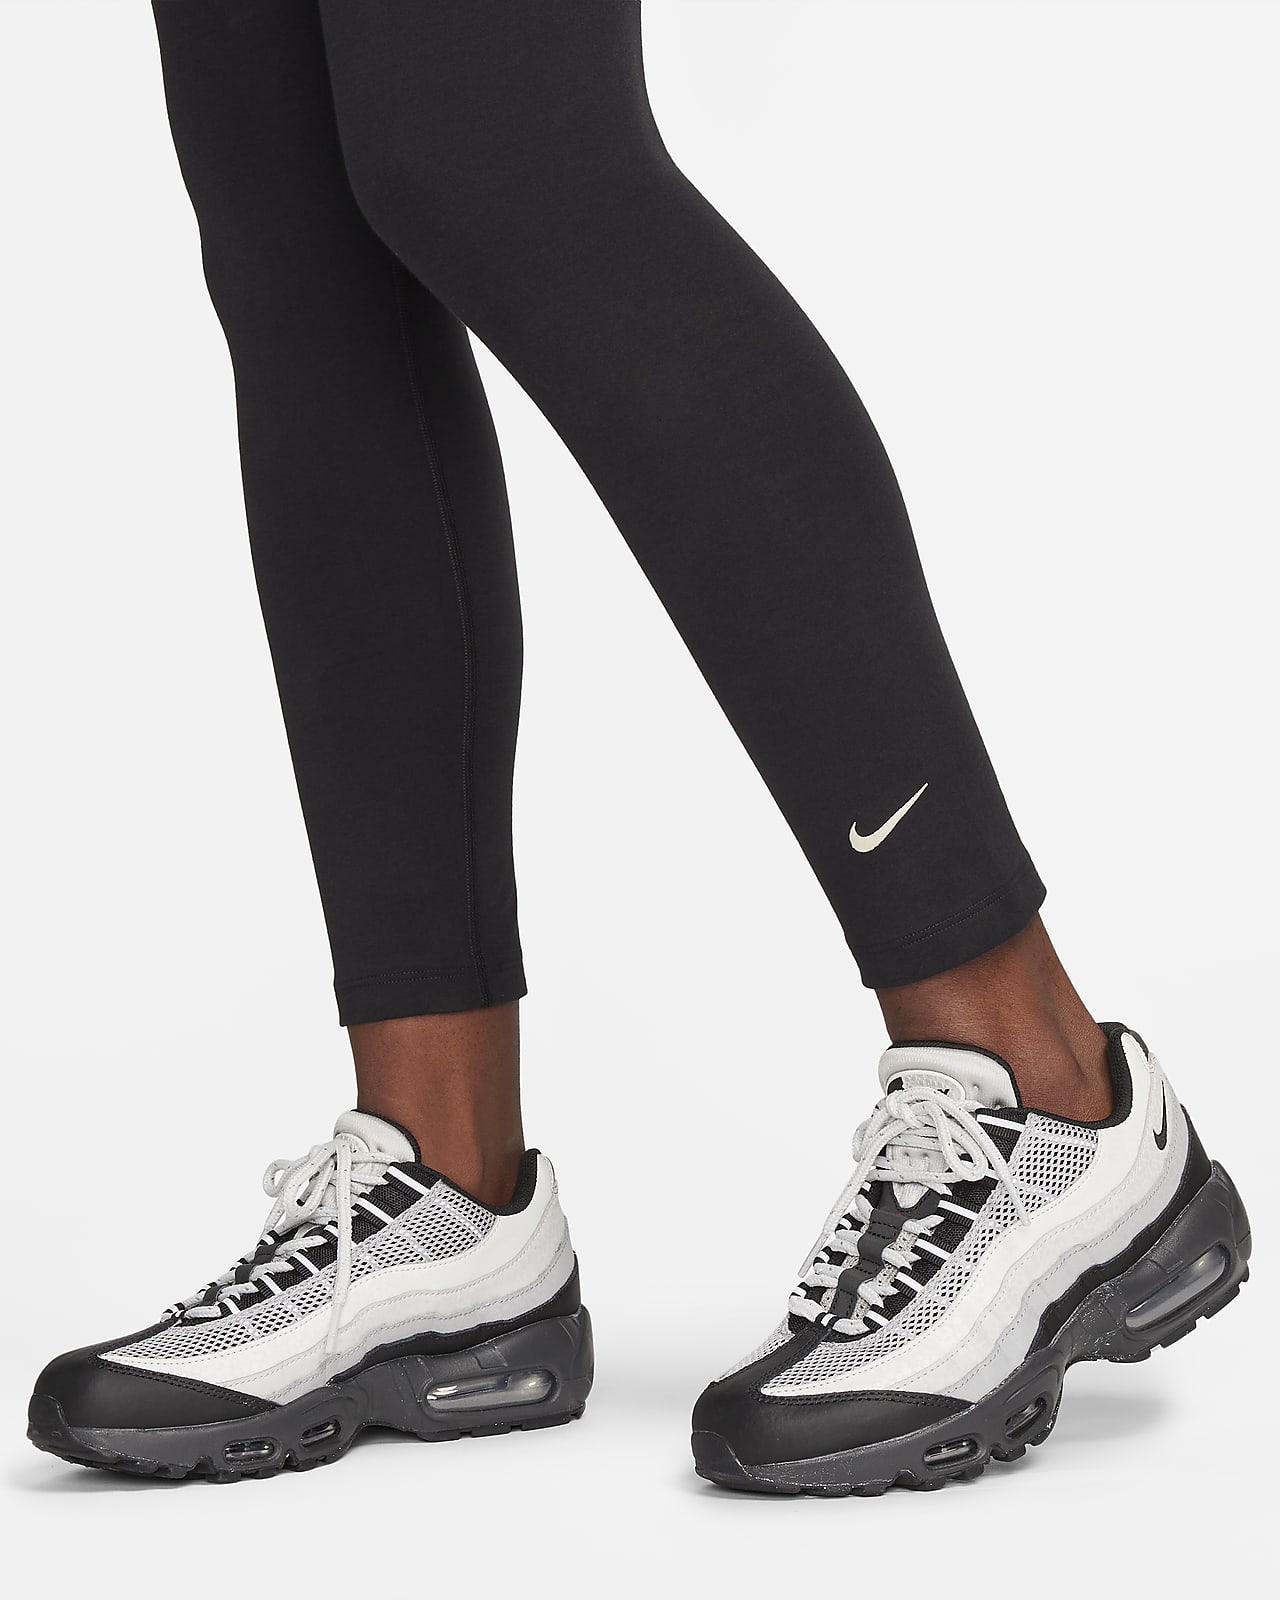 Nike Classic Women's Leggings : : Clothing, Shoes & Accessories